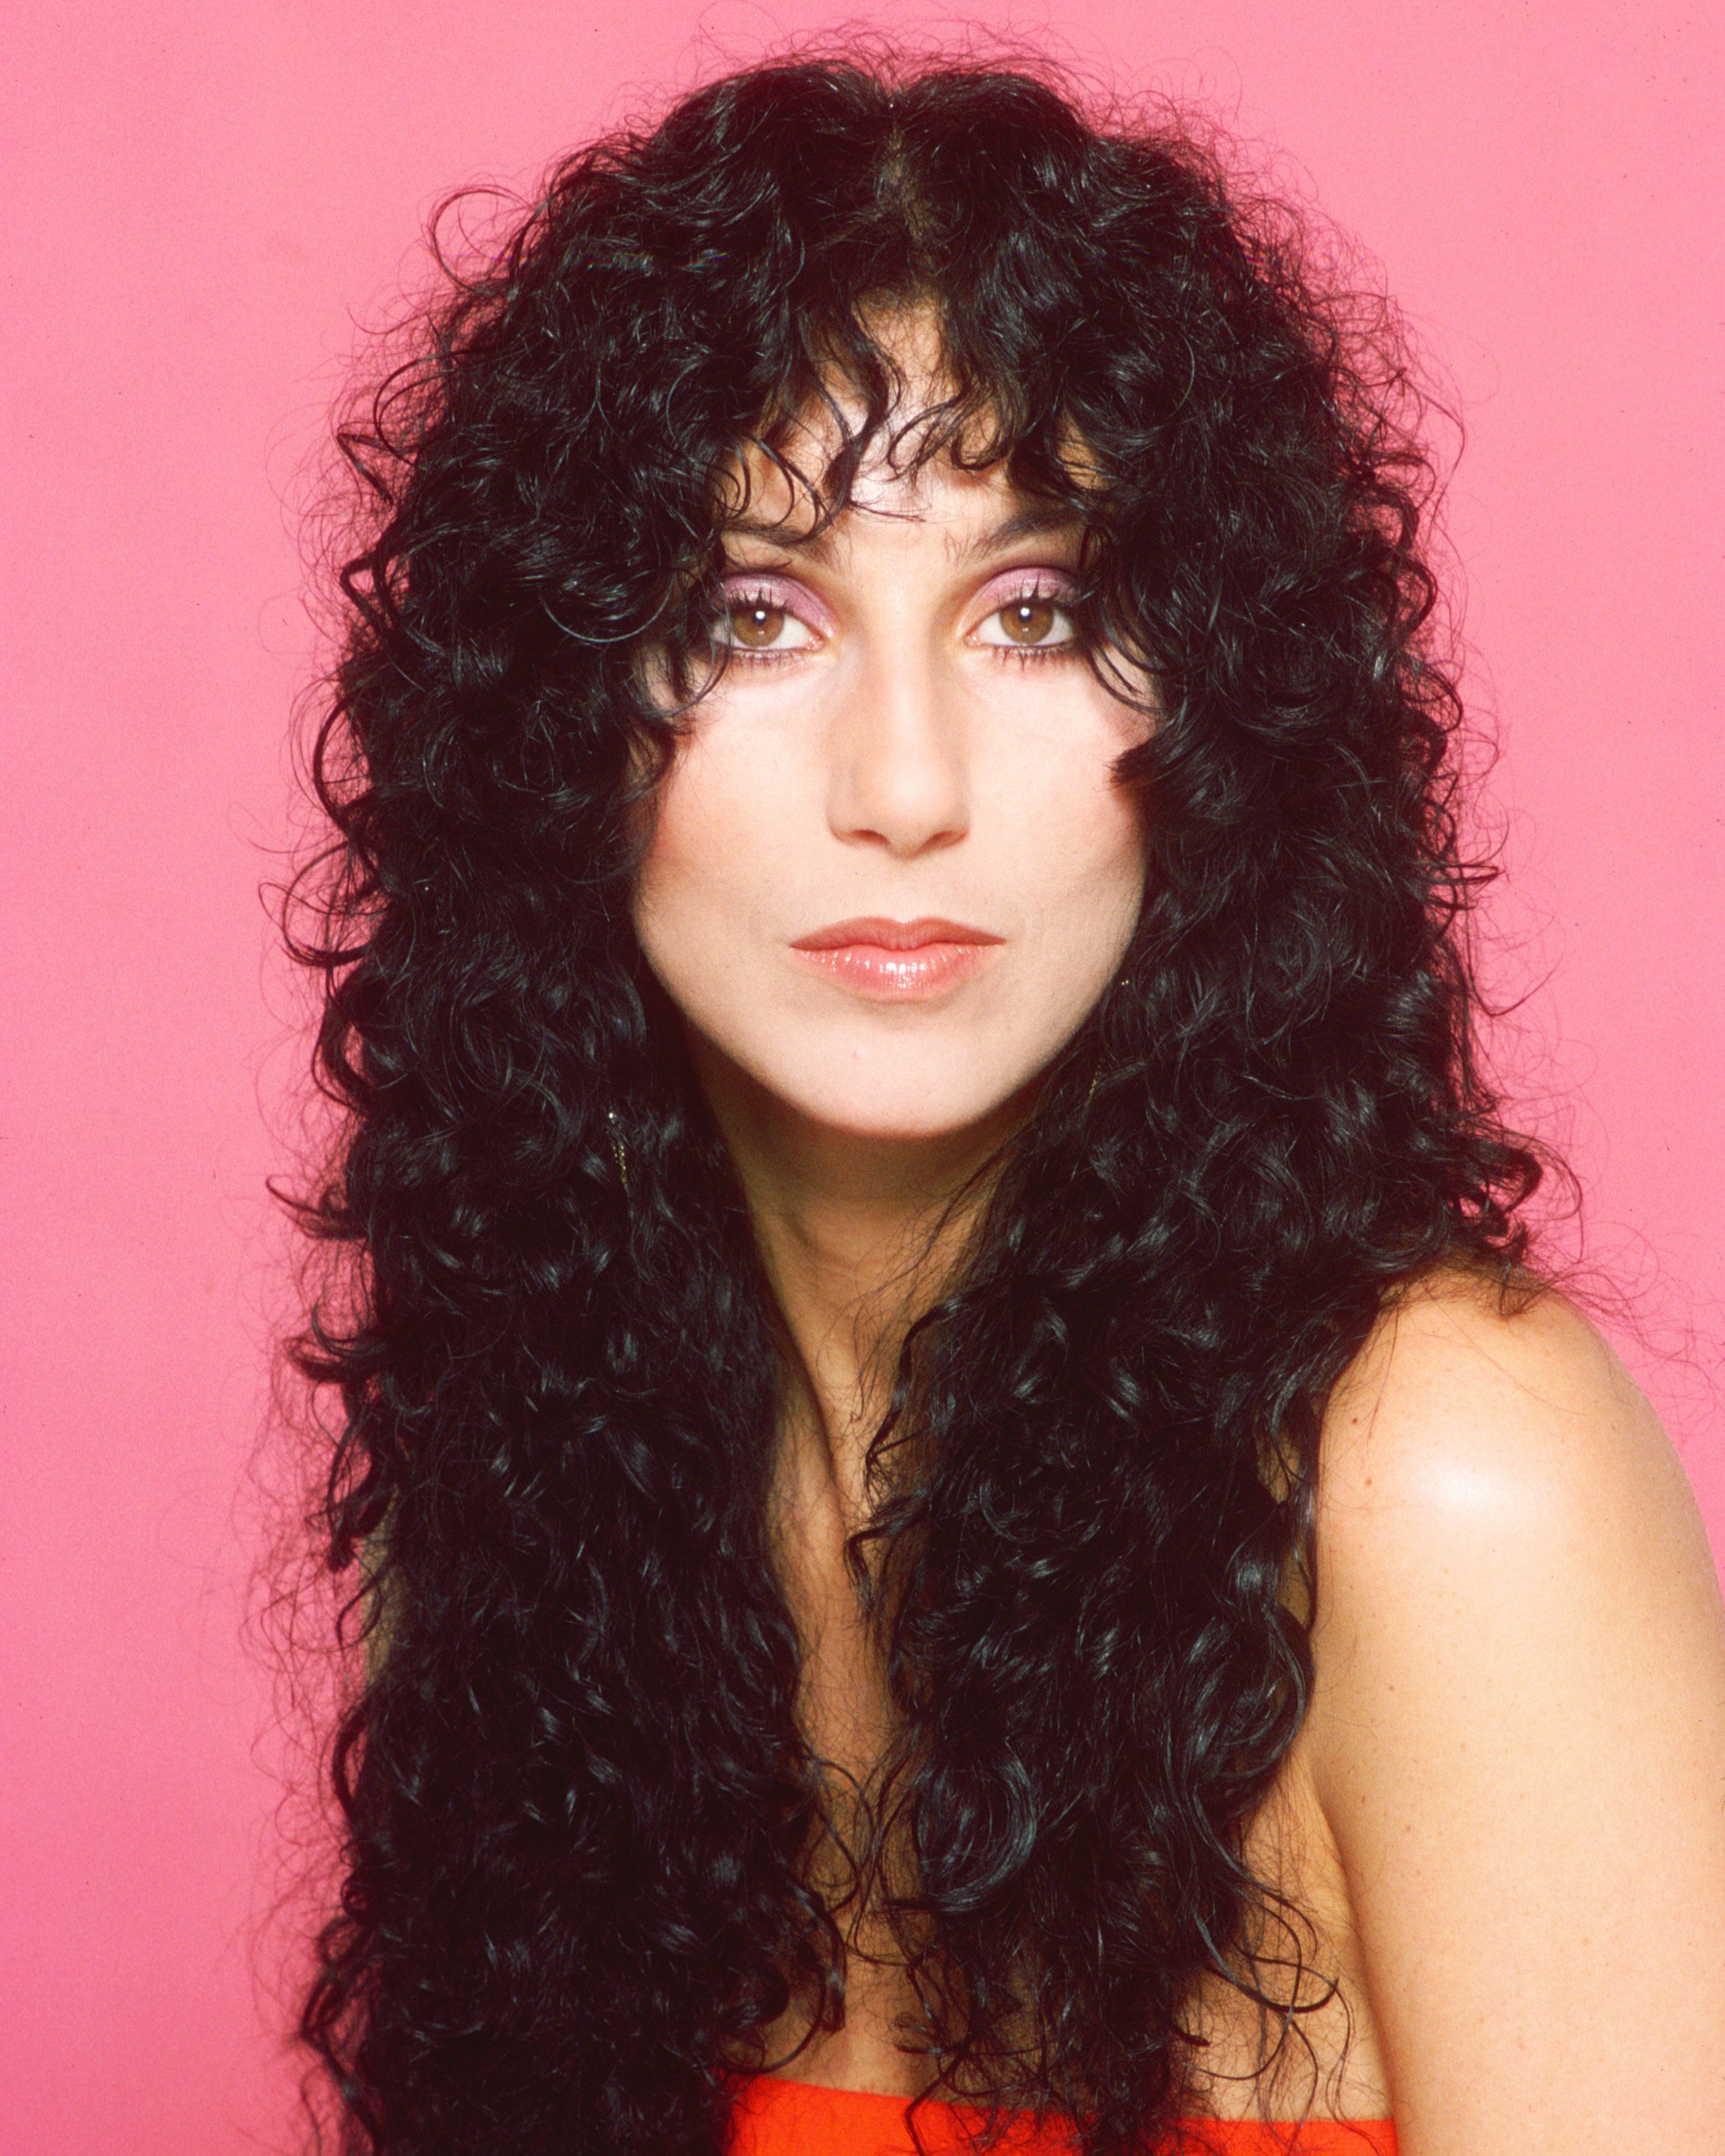 Cher poses for a portrait in July 1979 in Los Angeles, California | Source: Getty Images